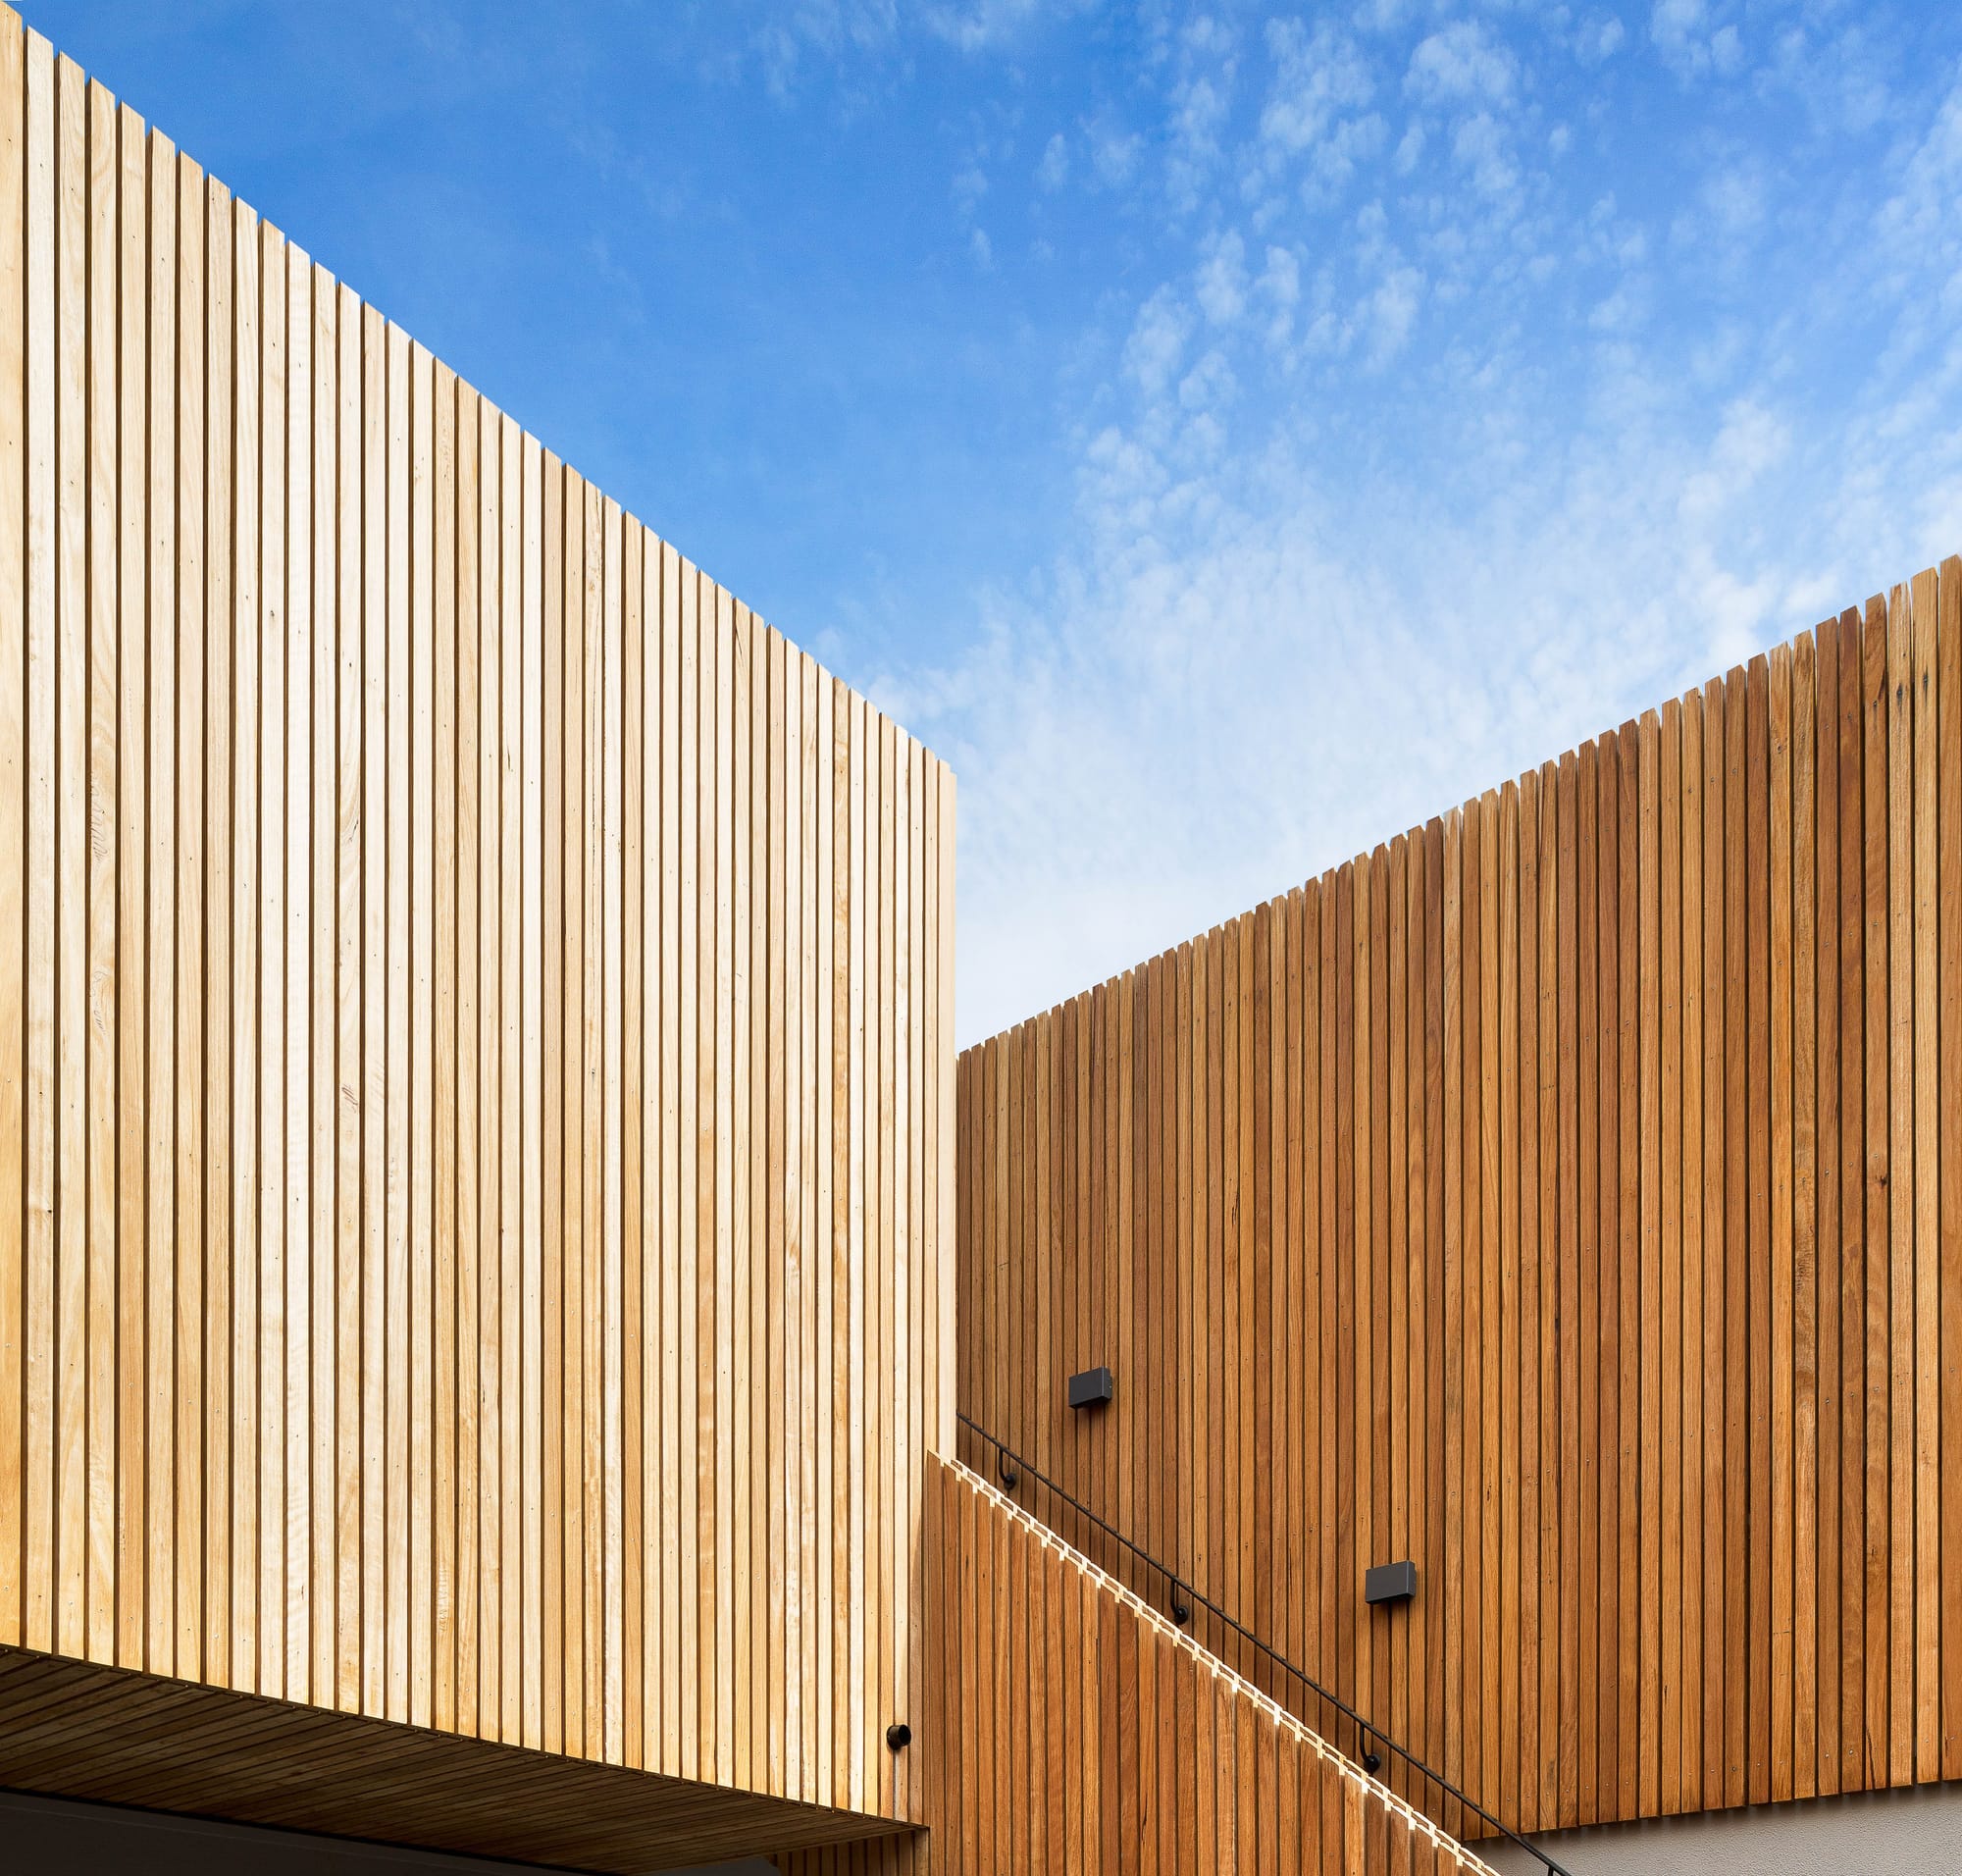 A detail shot of the external timber cladding and external staircase with blue sky behind